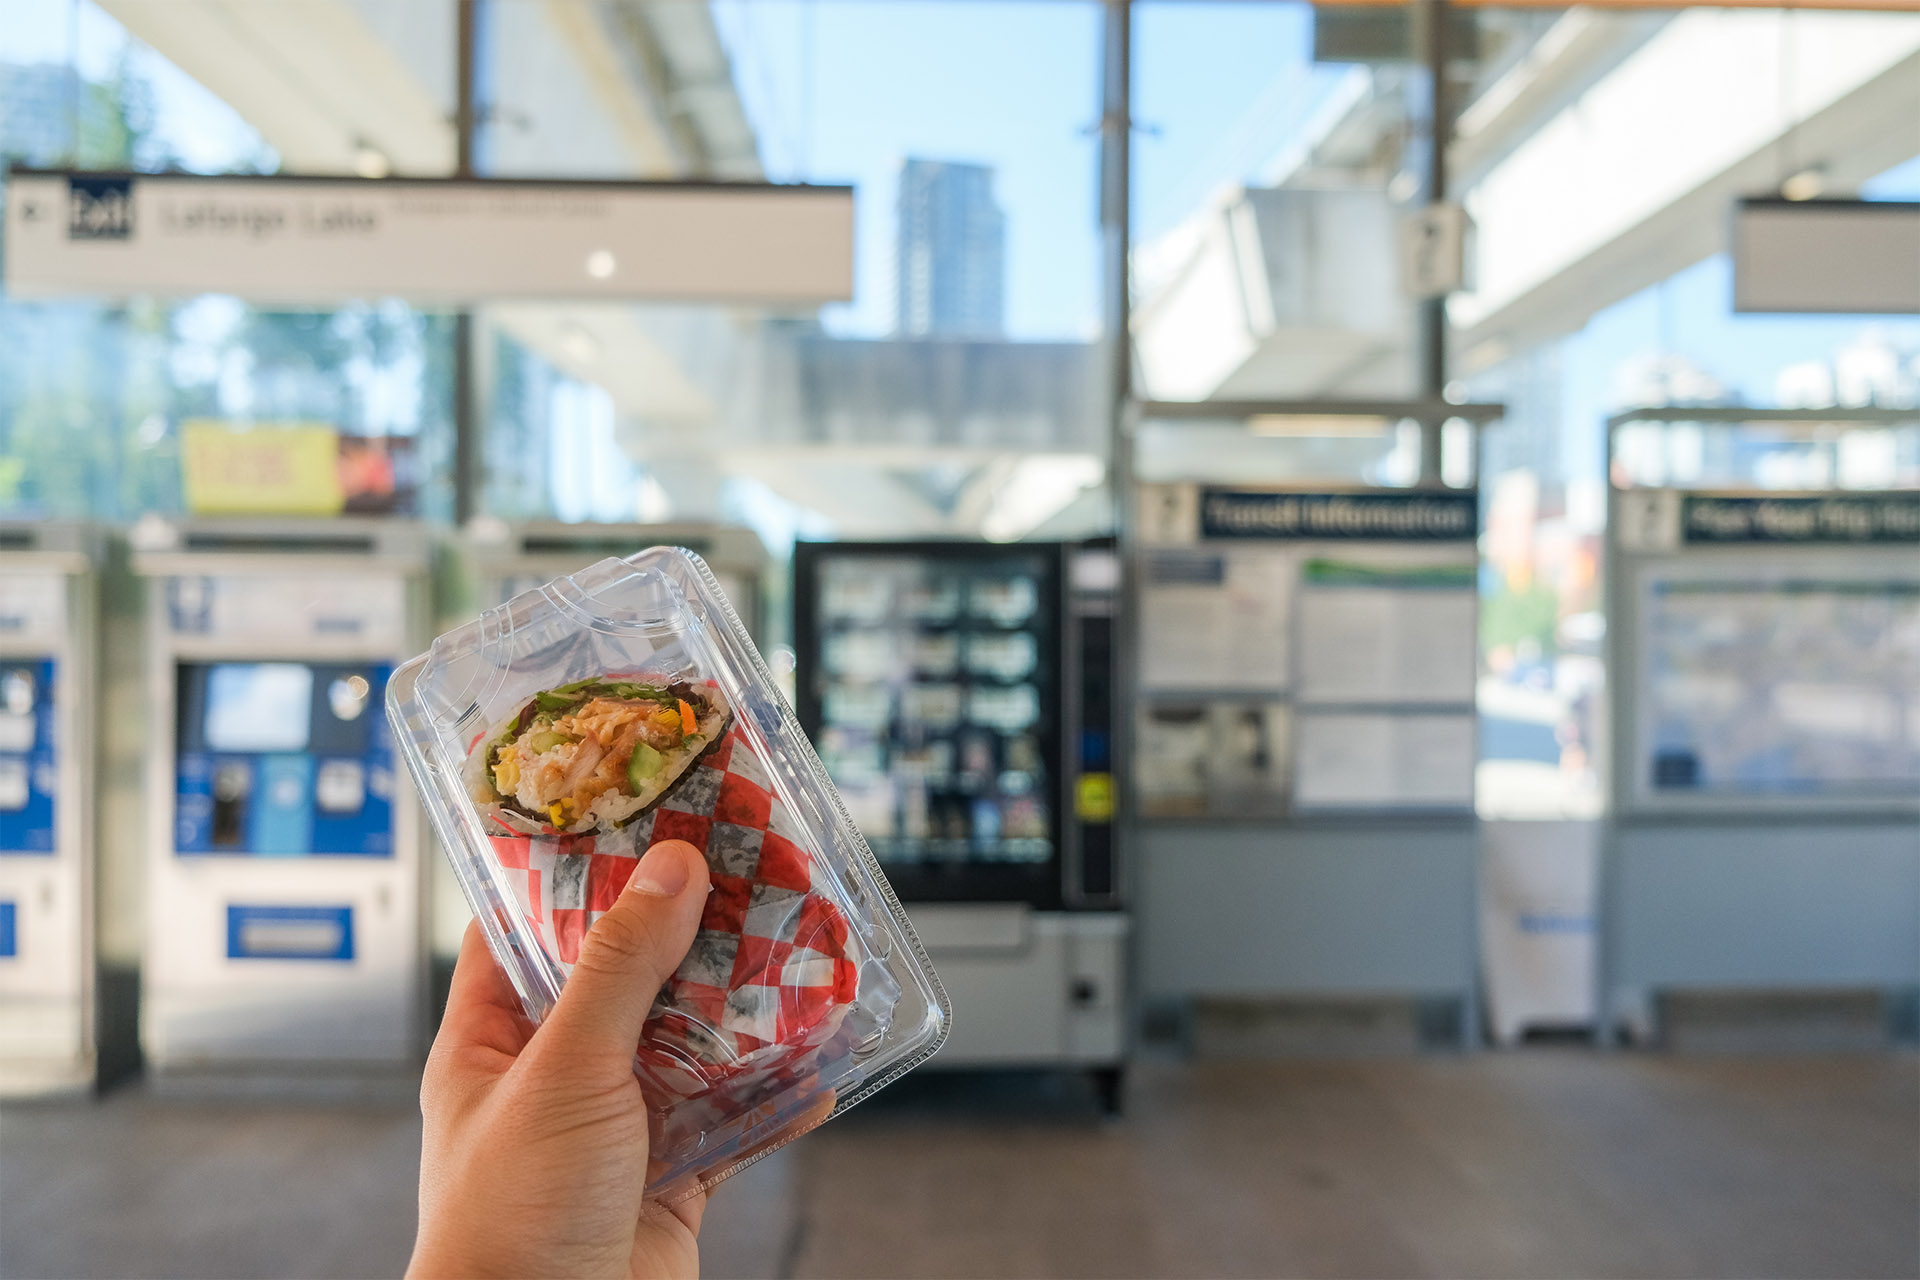 A sushi wrap in front of a vending machine at Lafarge Lake–Douglas Station